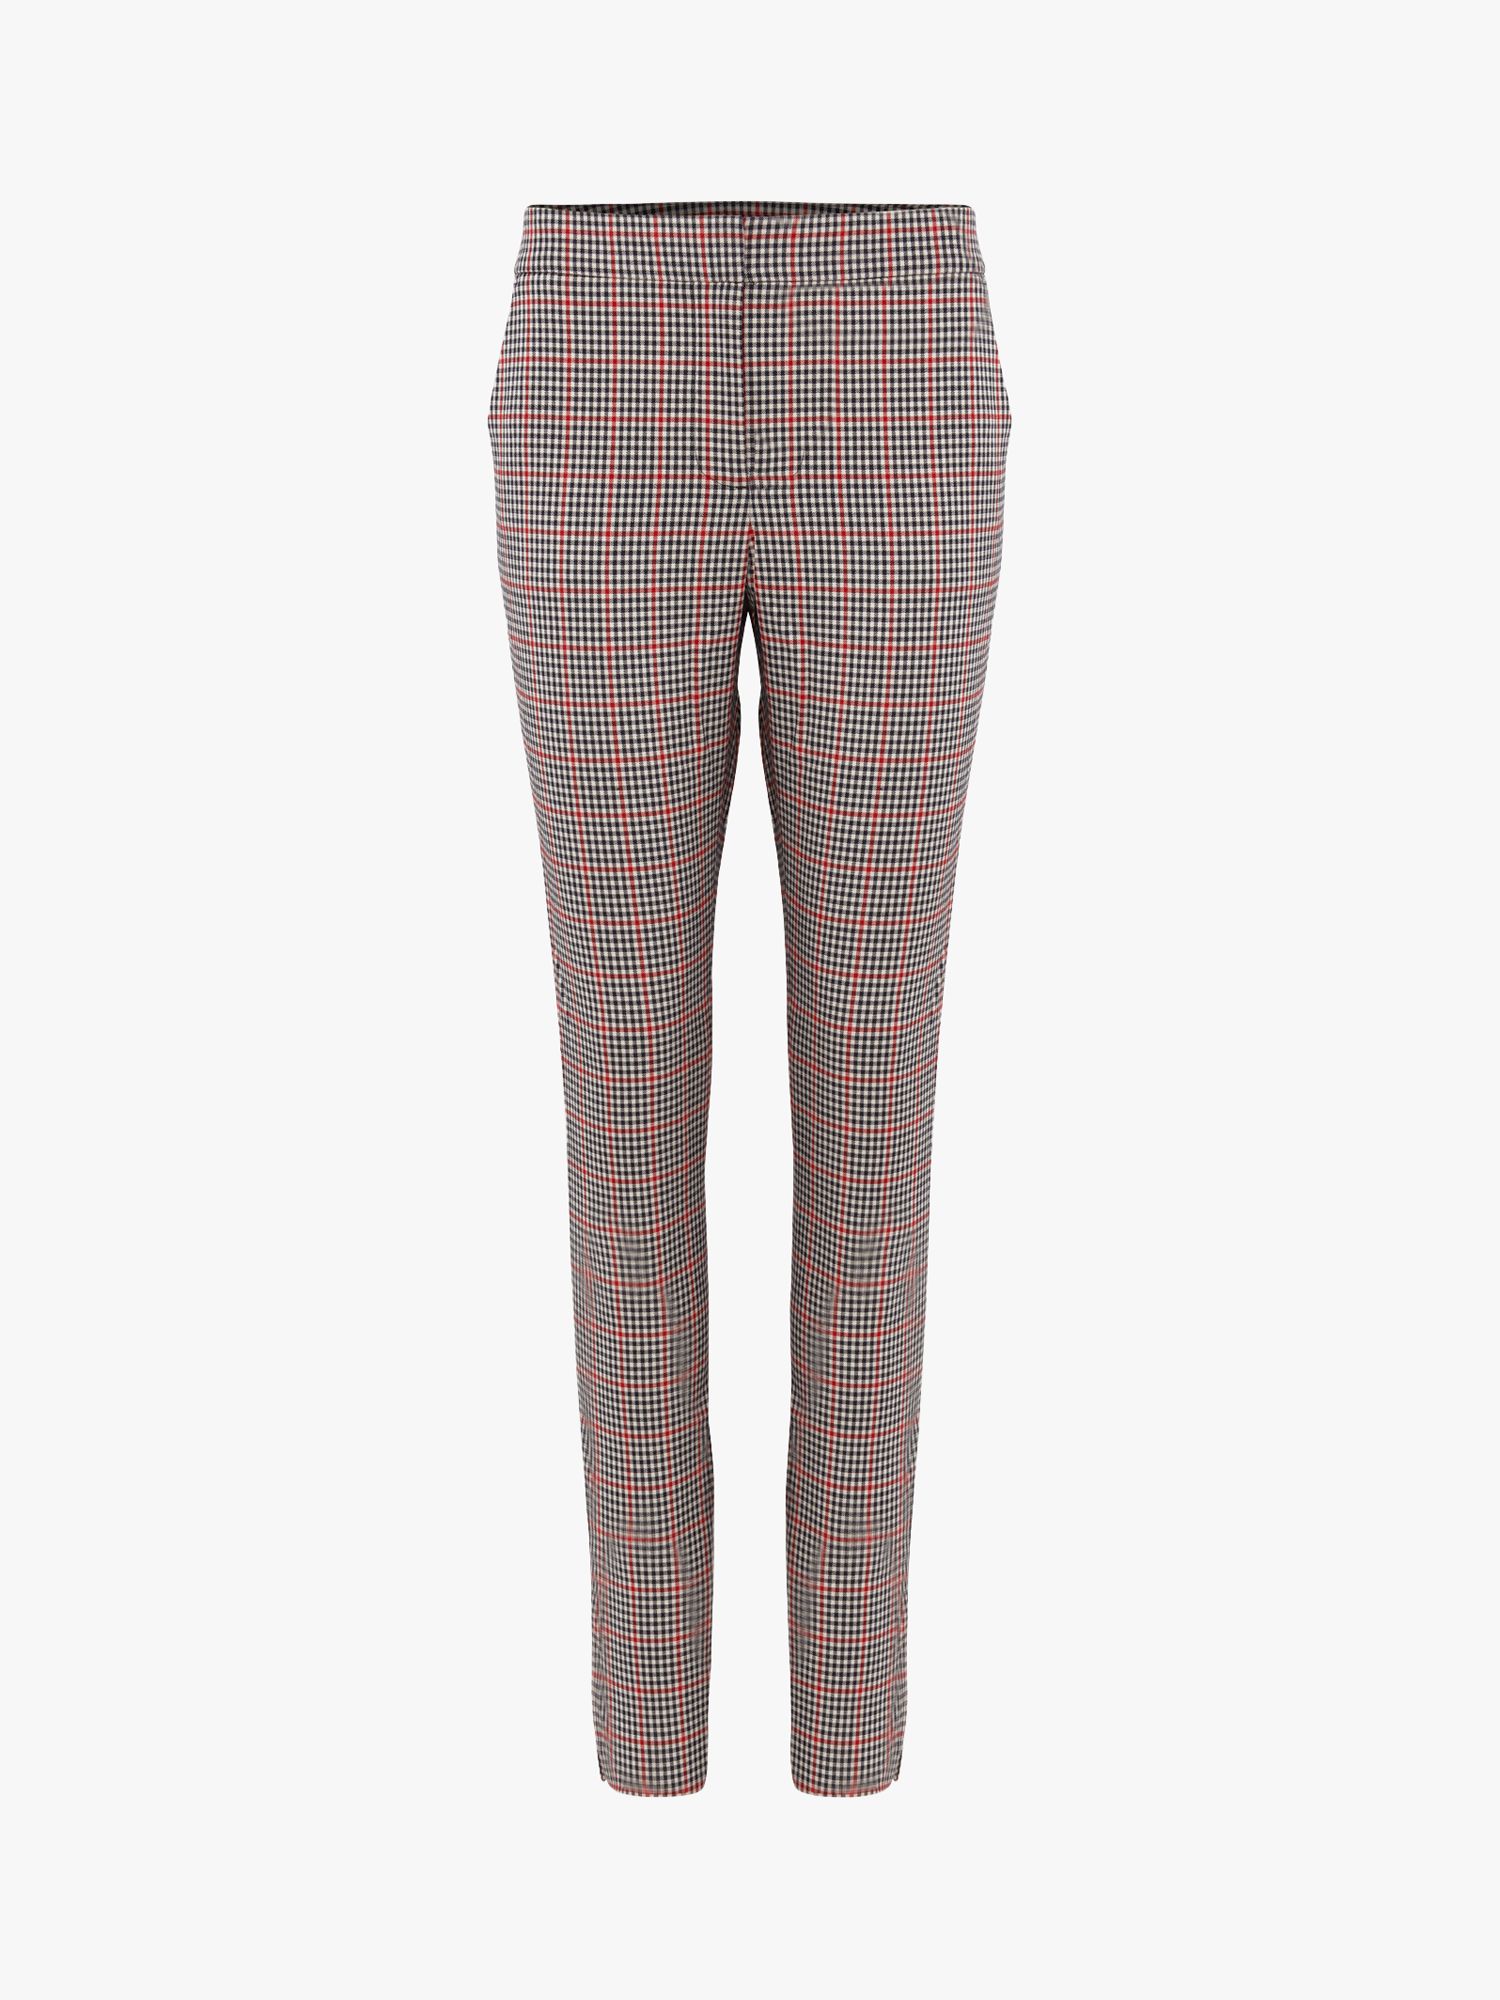 Hobbs Annie Check Trousers, Red/Black